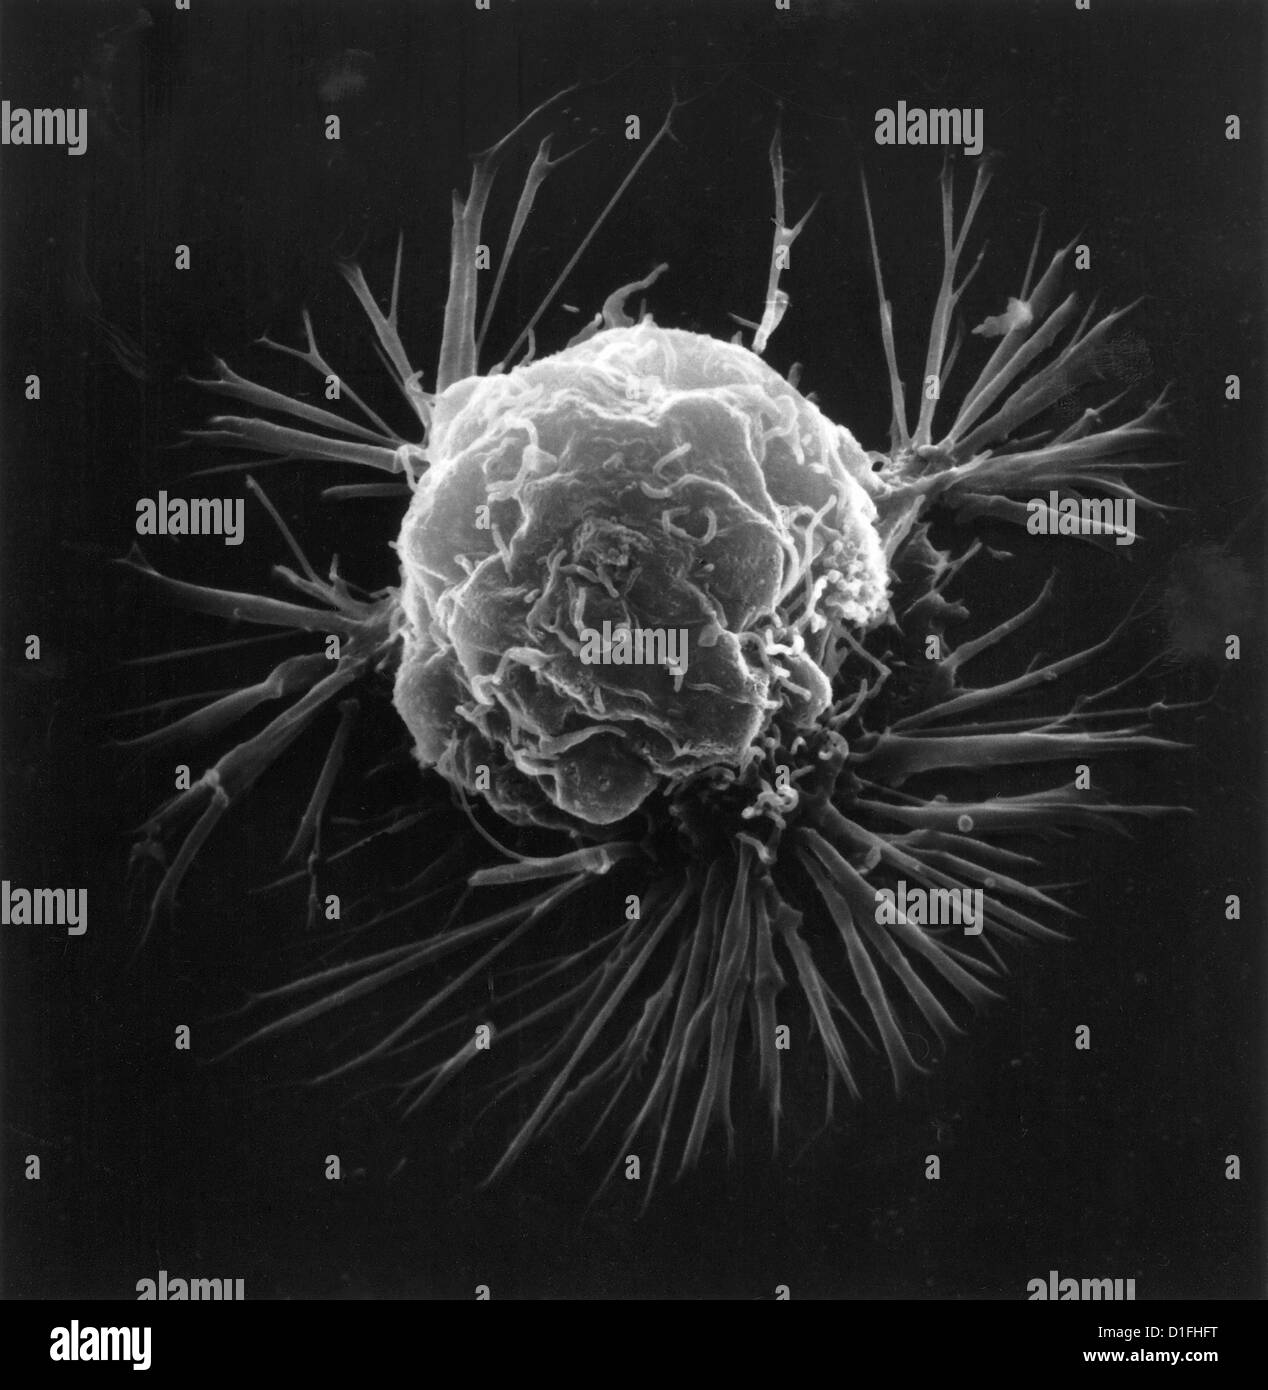 SEM - CANCER CELL Stock Photo